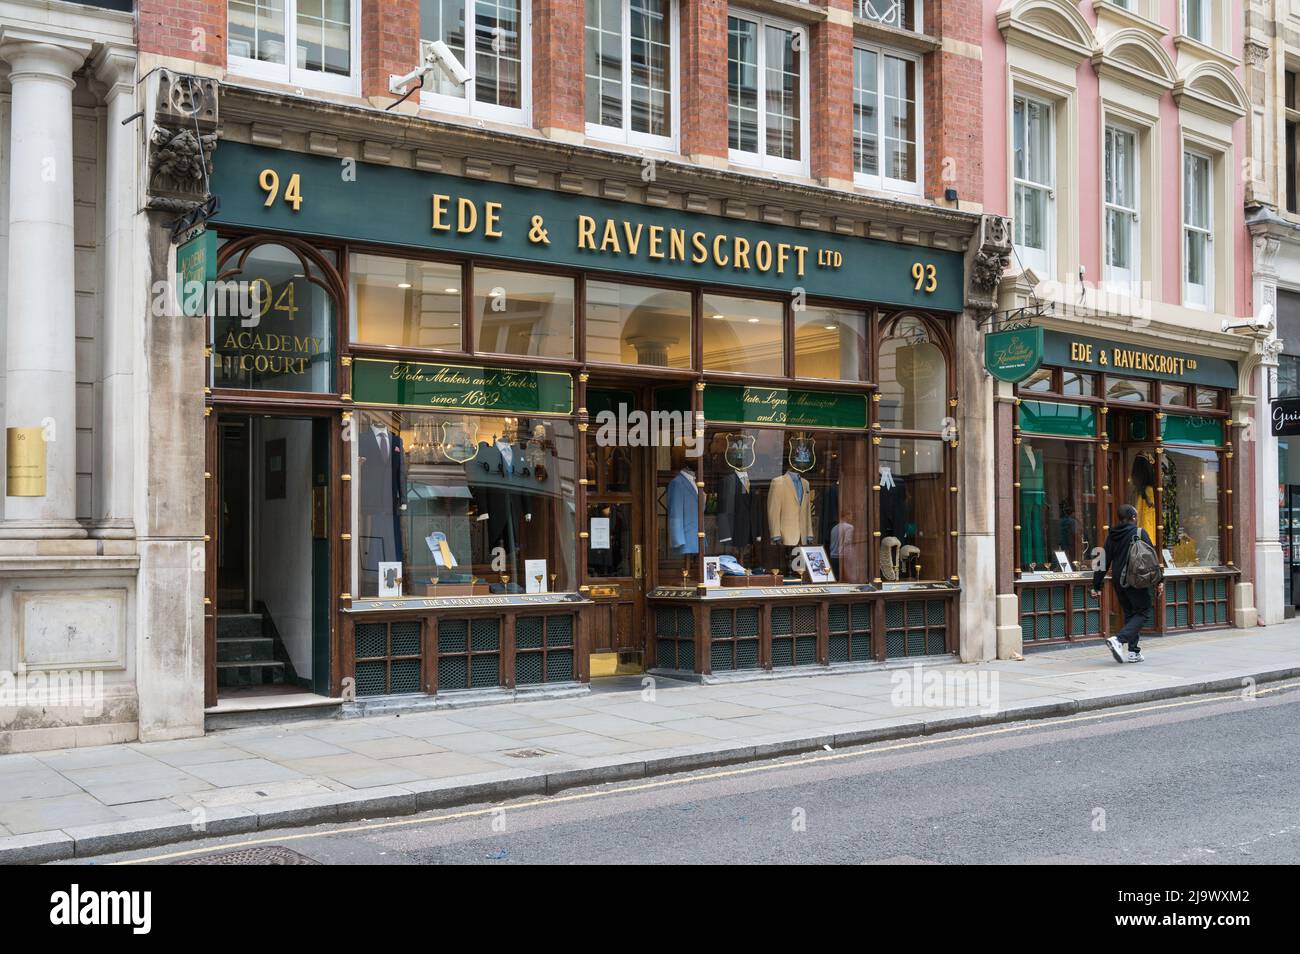 Exterior of the shopfront of Ede & Ravenscroft, thought to be the oldest firm of tailors in the world. Chancery Lane, London, England, UK. Stock Photo